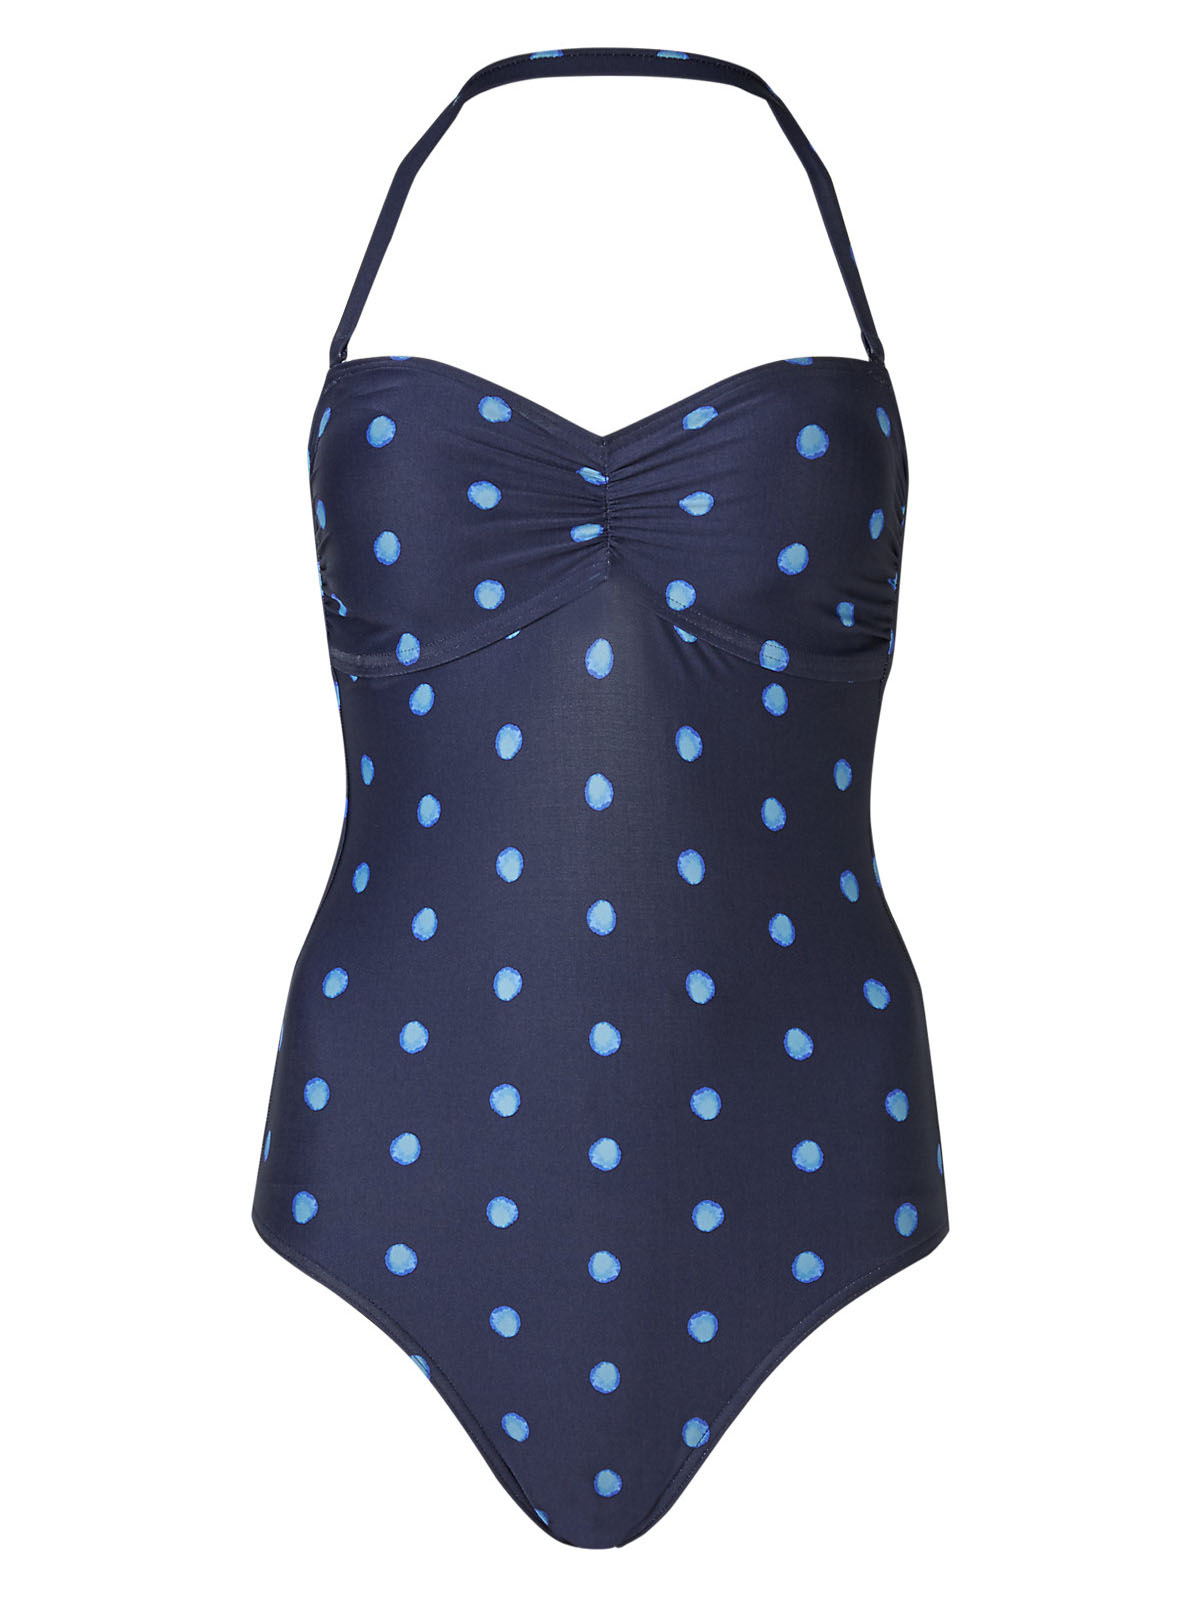 Marks and Spencer - - M&5 NAVY Spotted Secret Slimming Swimsuit - Size ...